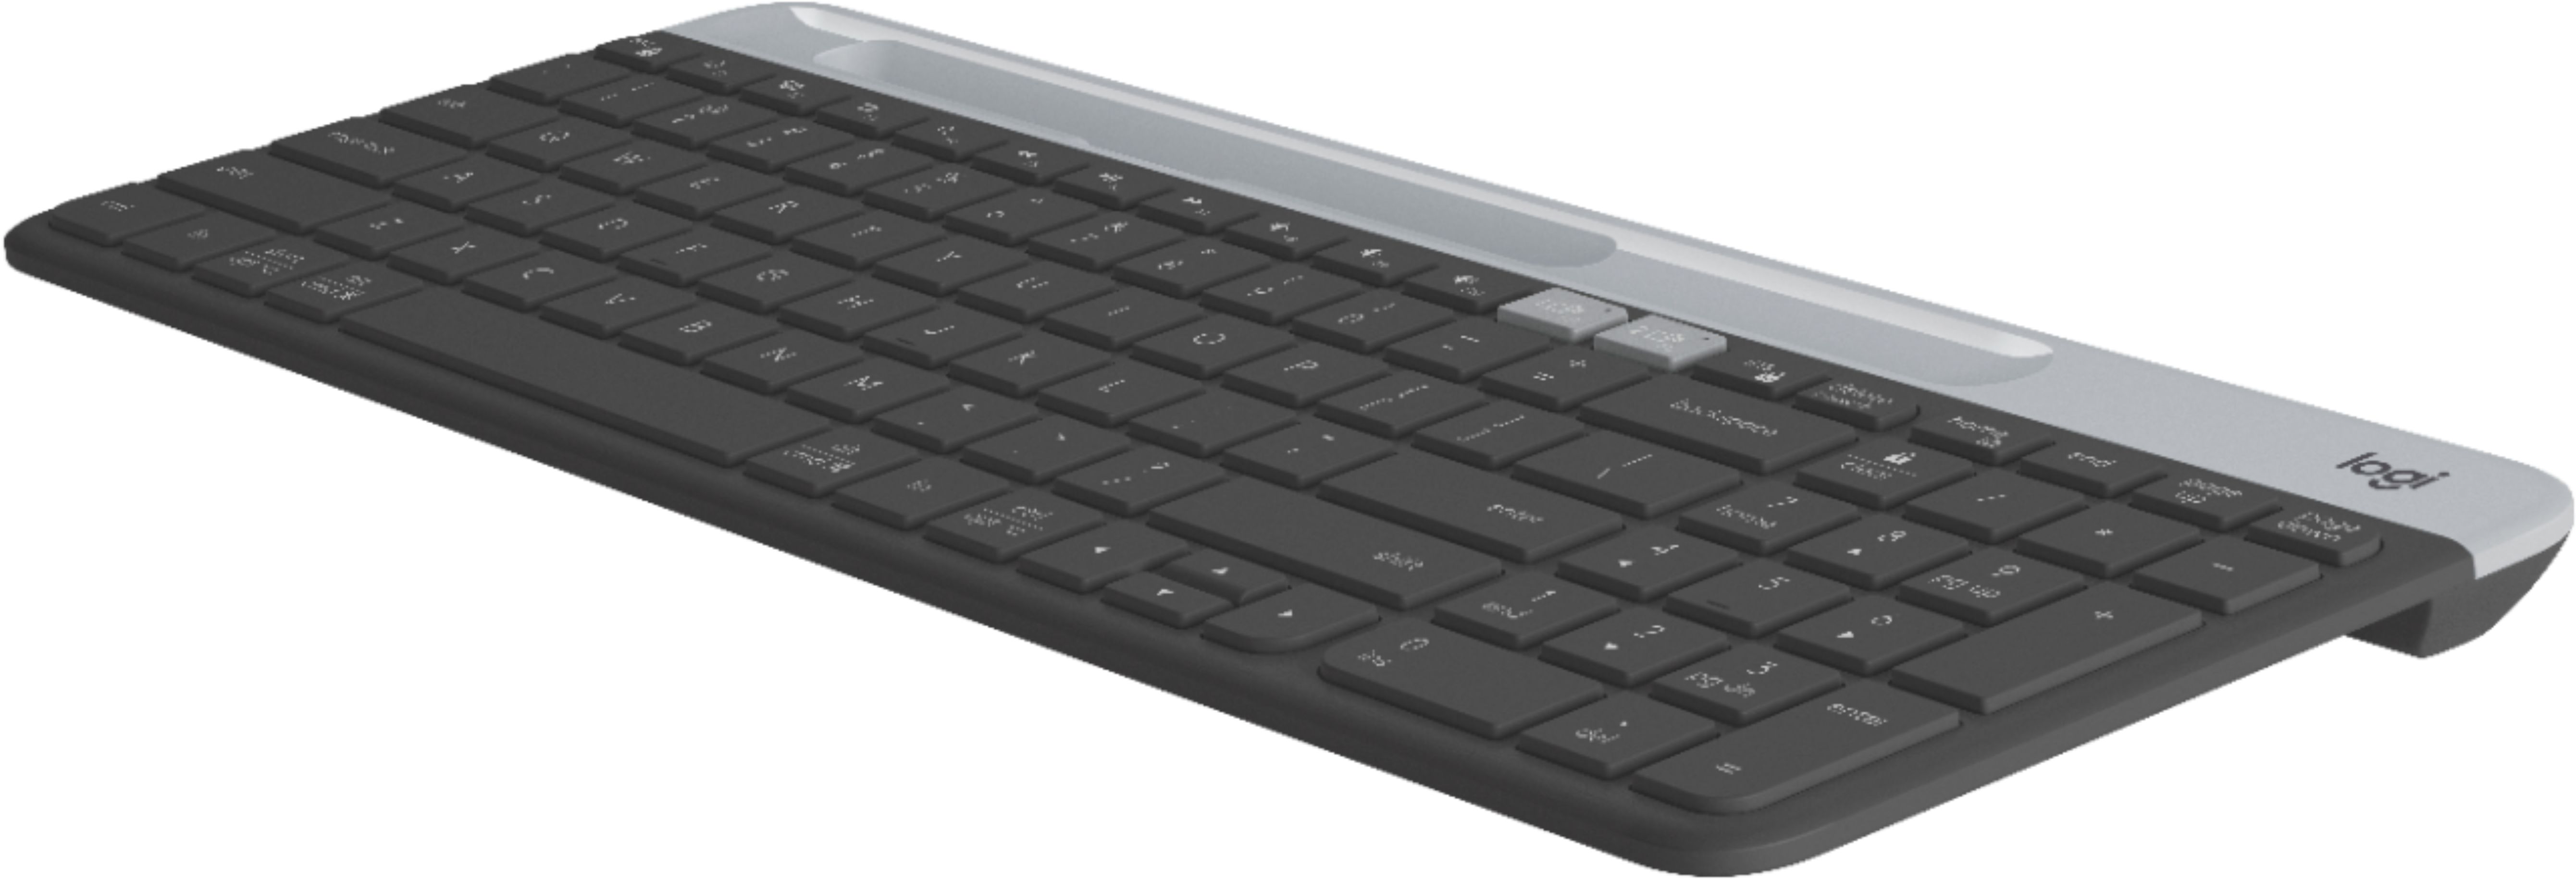 Best Buy essentials™ Full-size Wireless Membrane Keyboard and